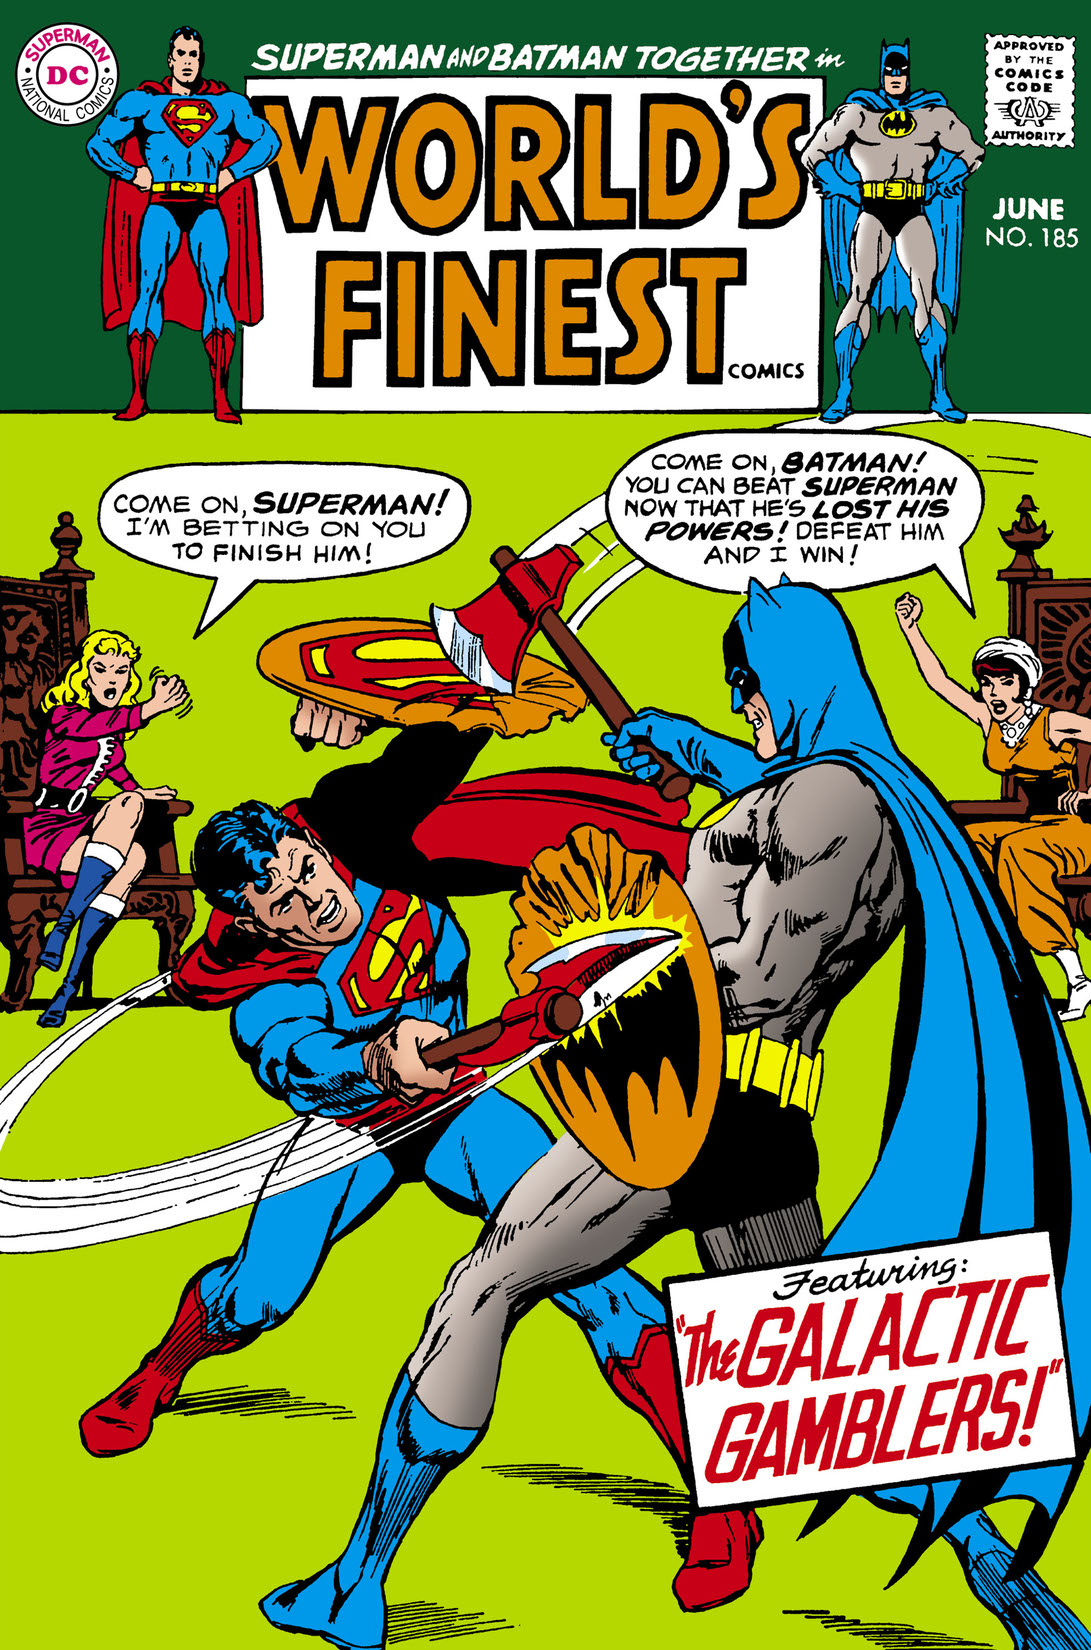 World's Finest Comics (1941-) #185 preview images